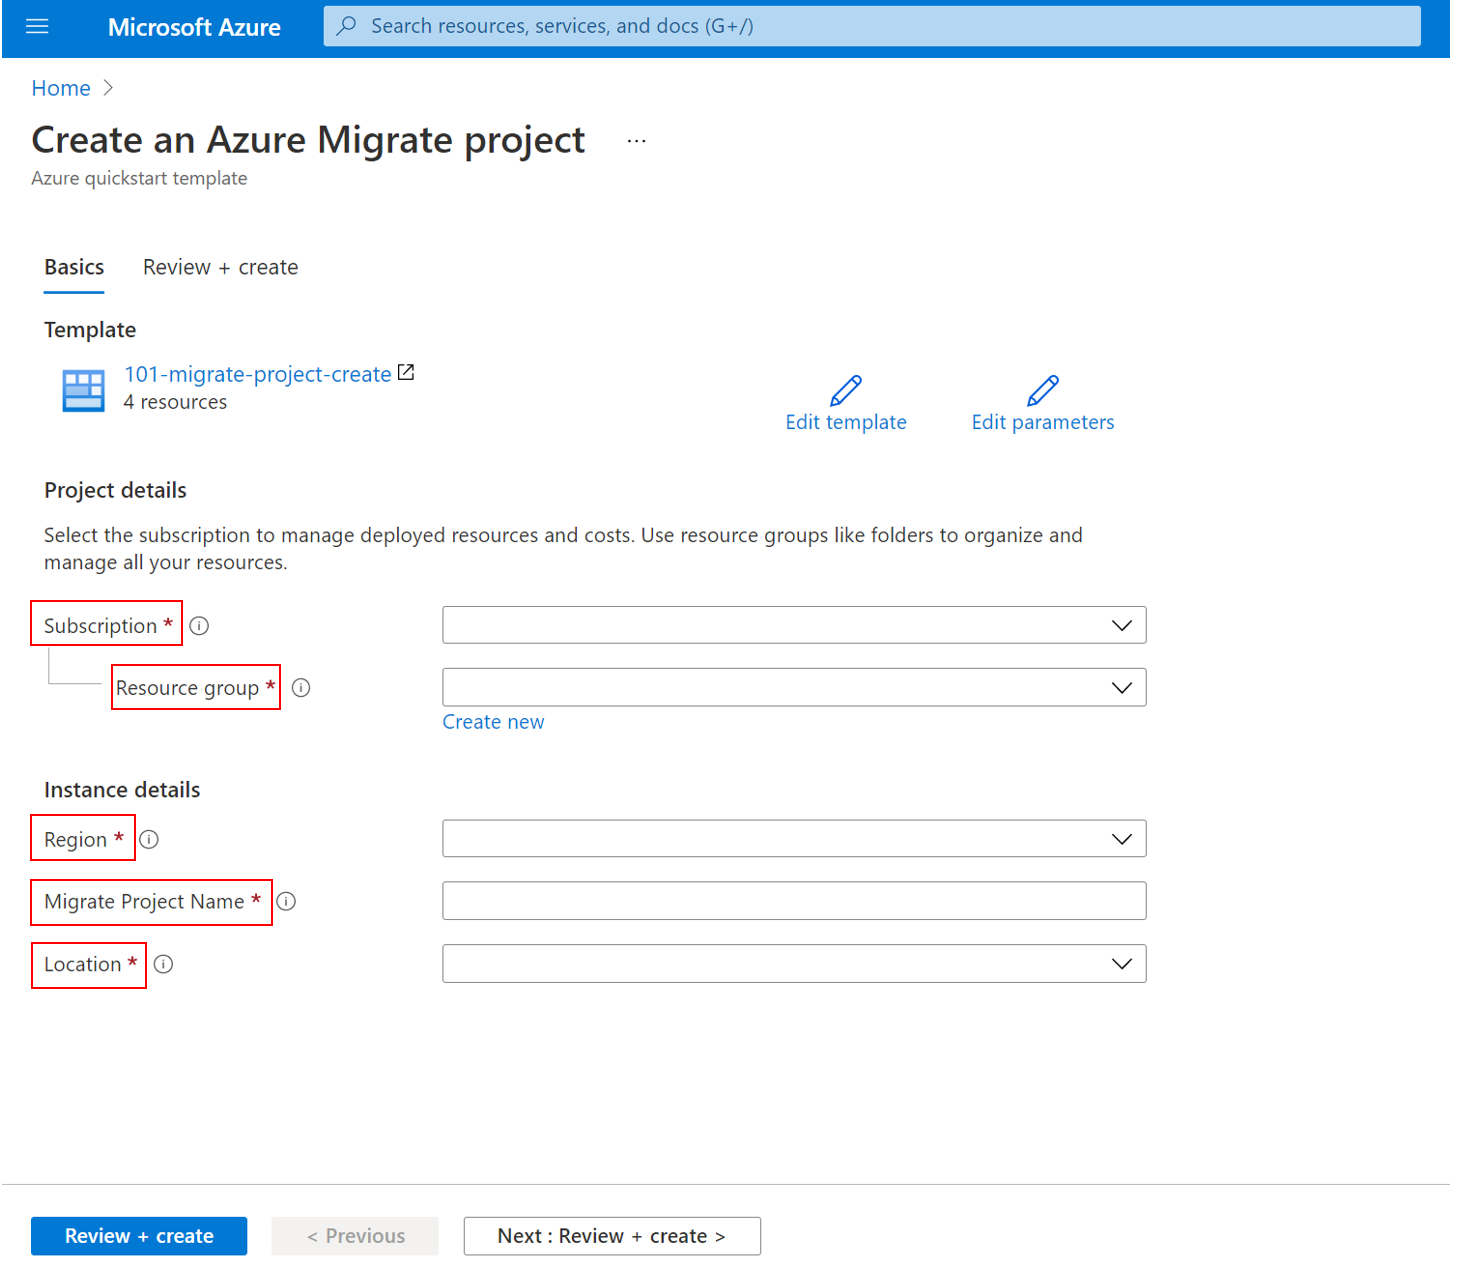 Template to create an Azure Migrate project.